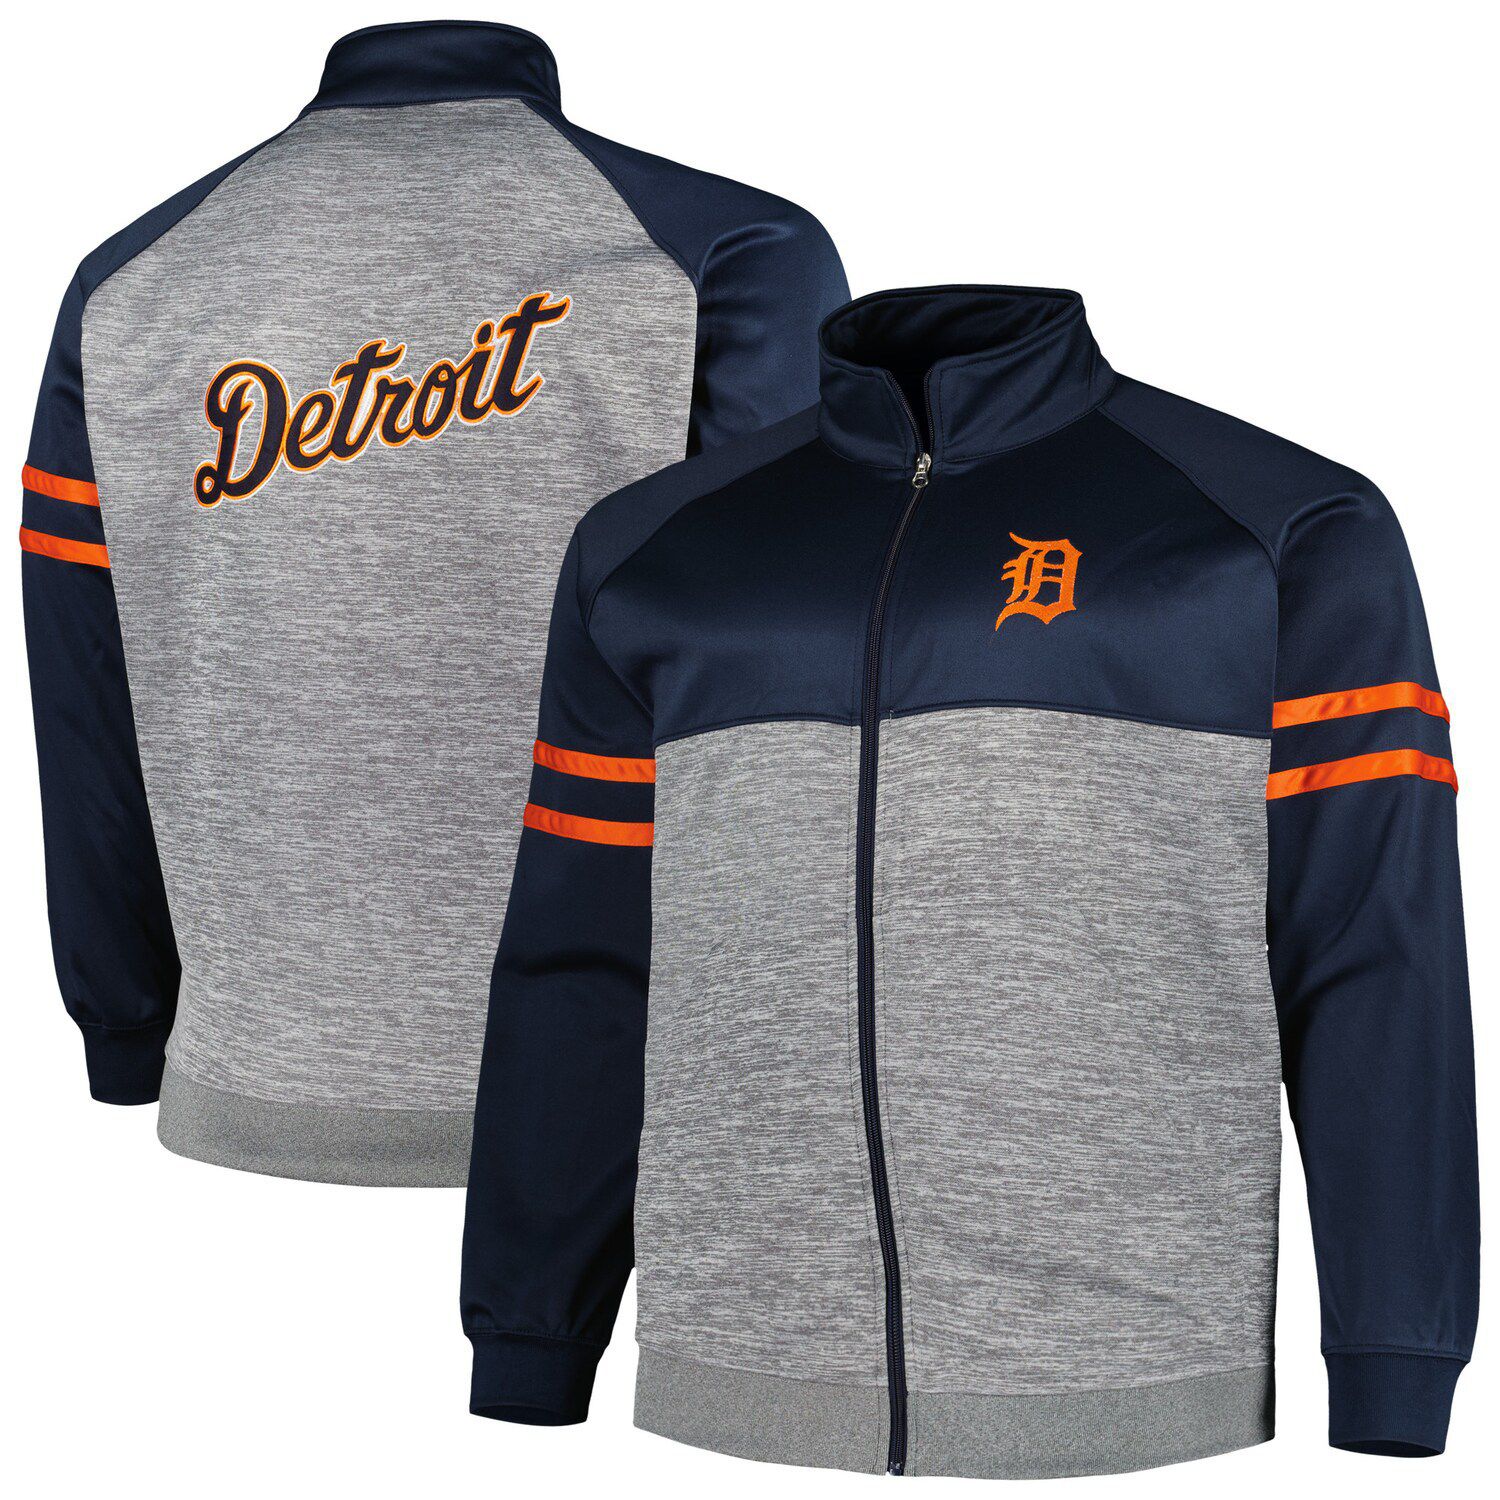 Detroit Tigers G-III 4Her Women's First Place Track Jacket - Navy Large